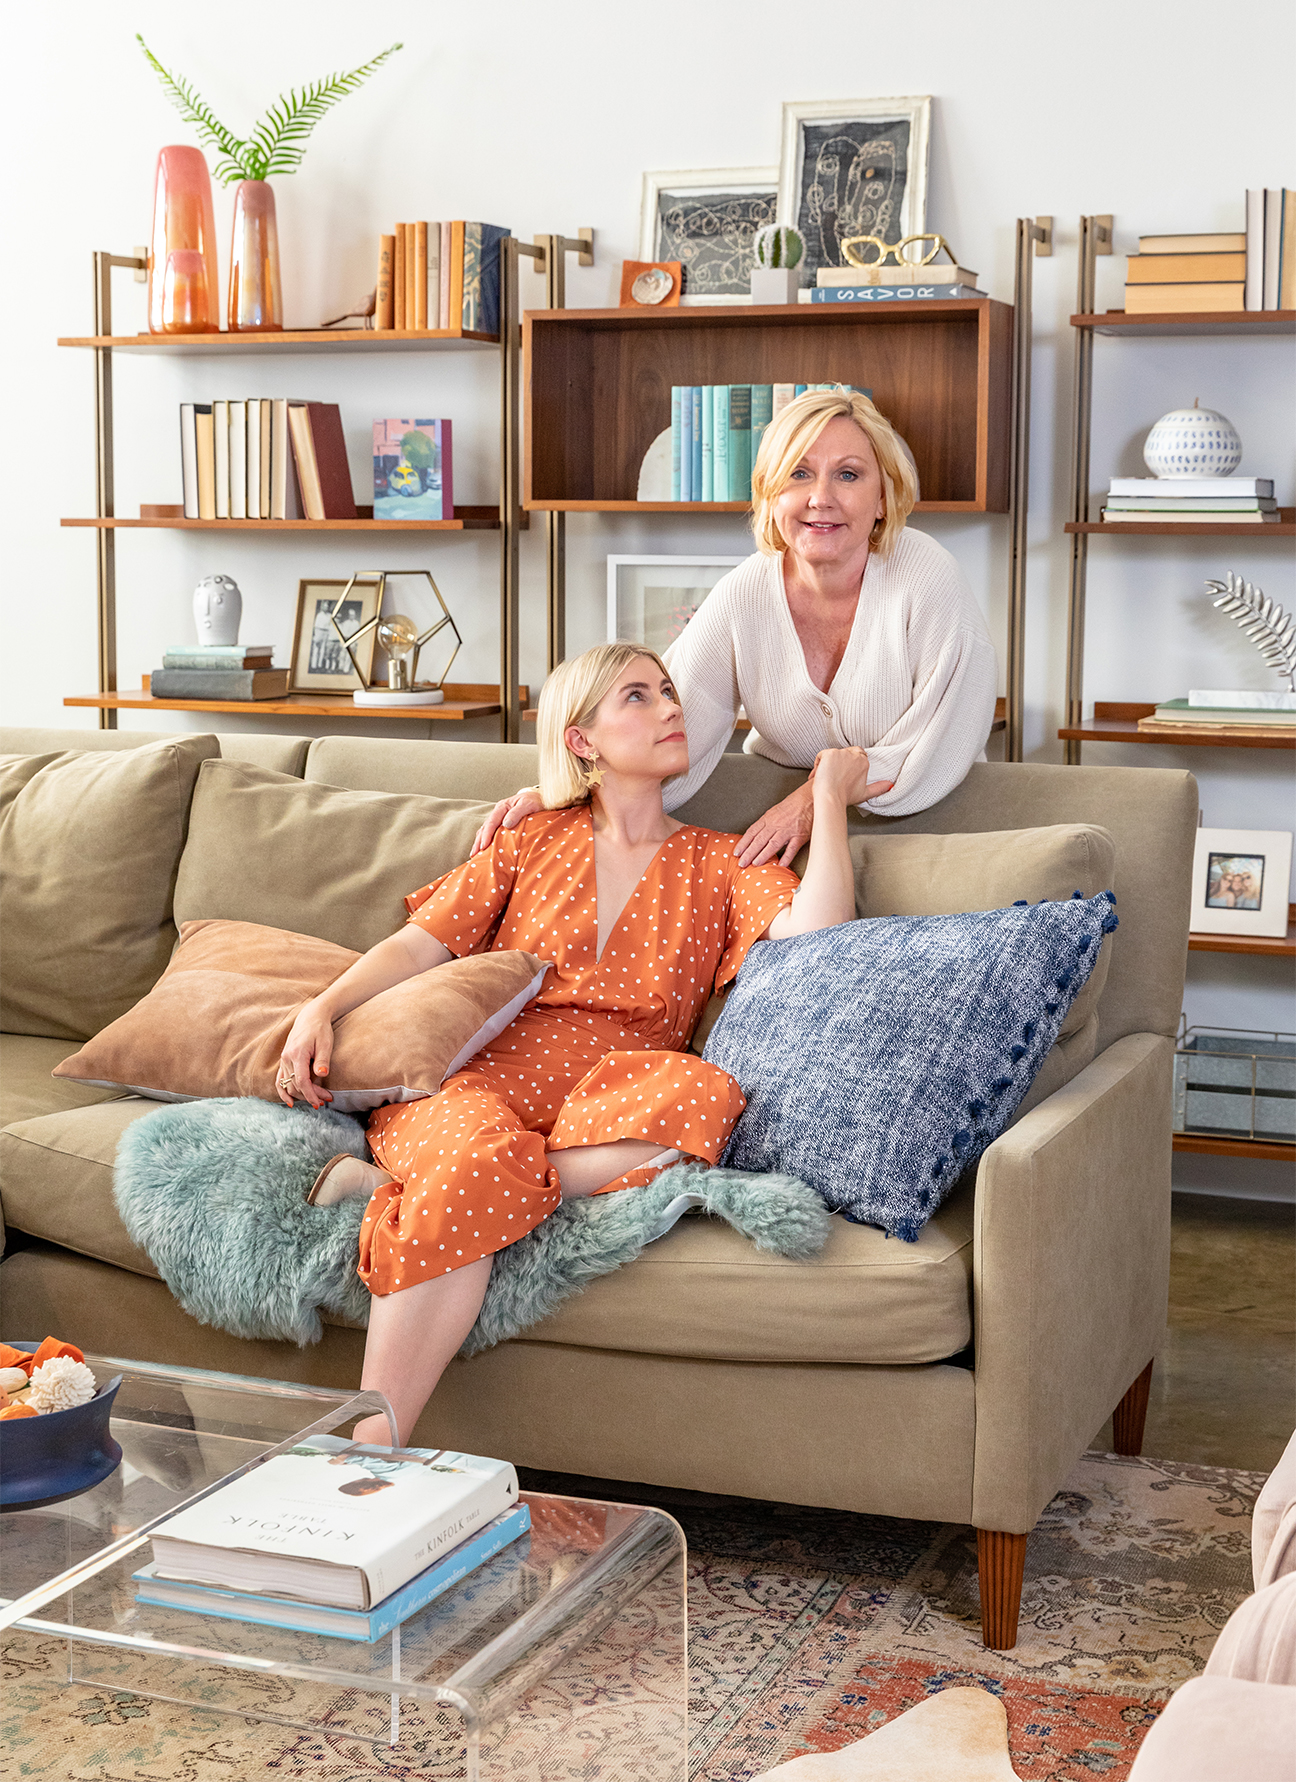 abby pendergrast and her mom sitting on a sofa together